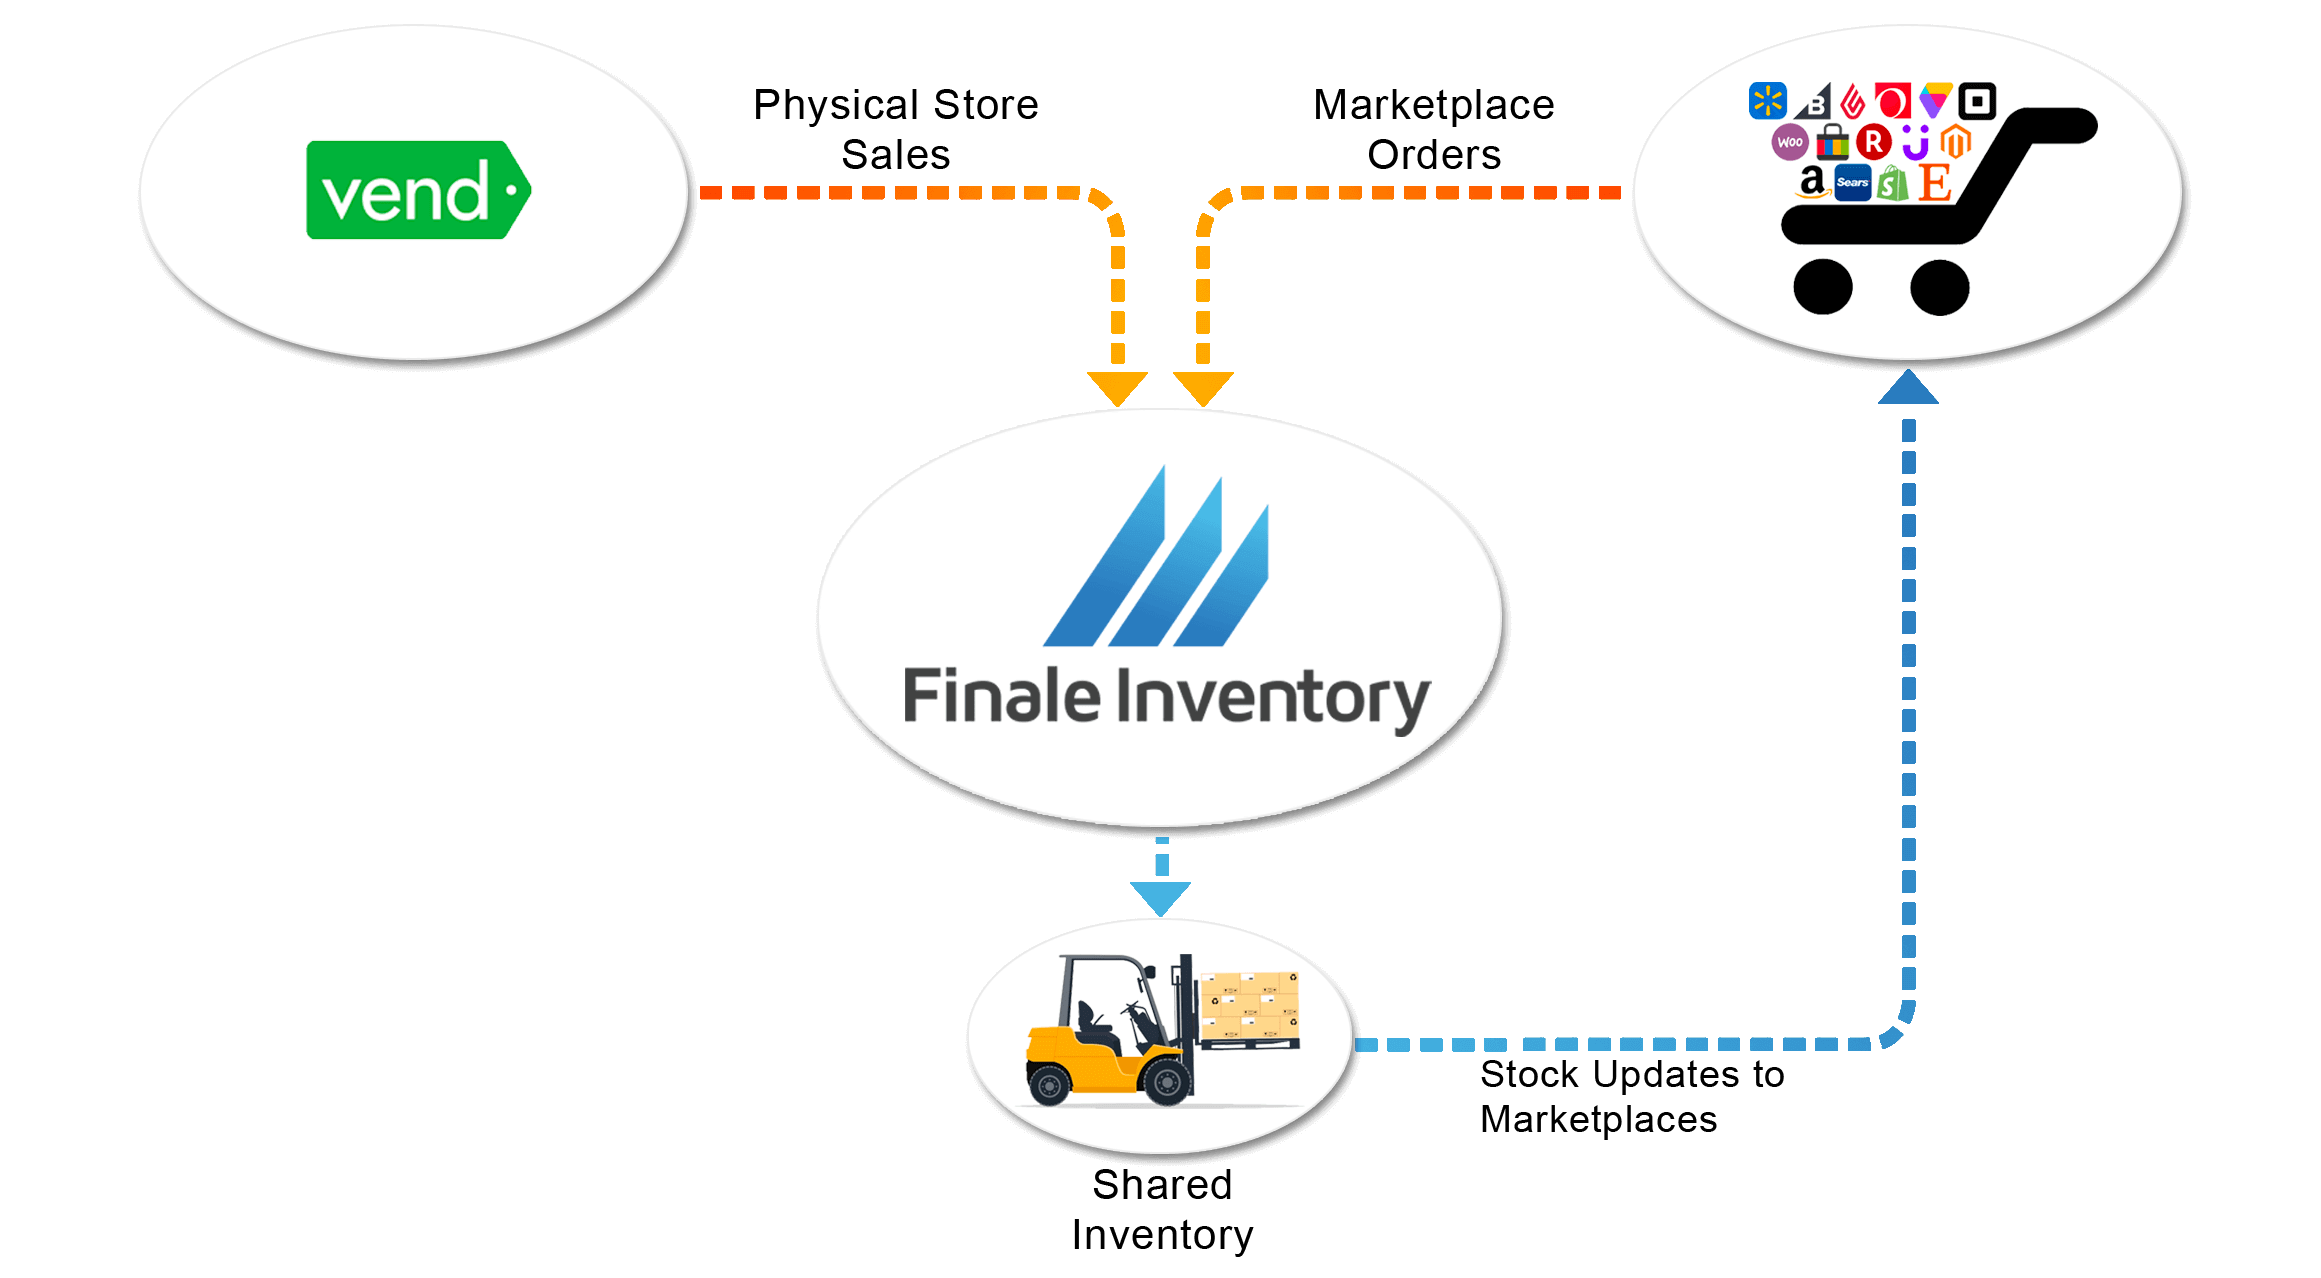 vend inventory management, Vend Inventory Management for Multichannel Sellers